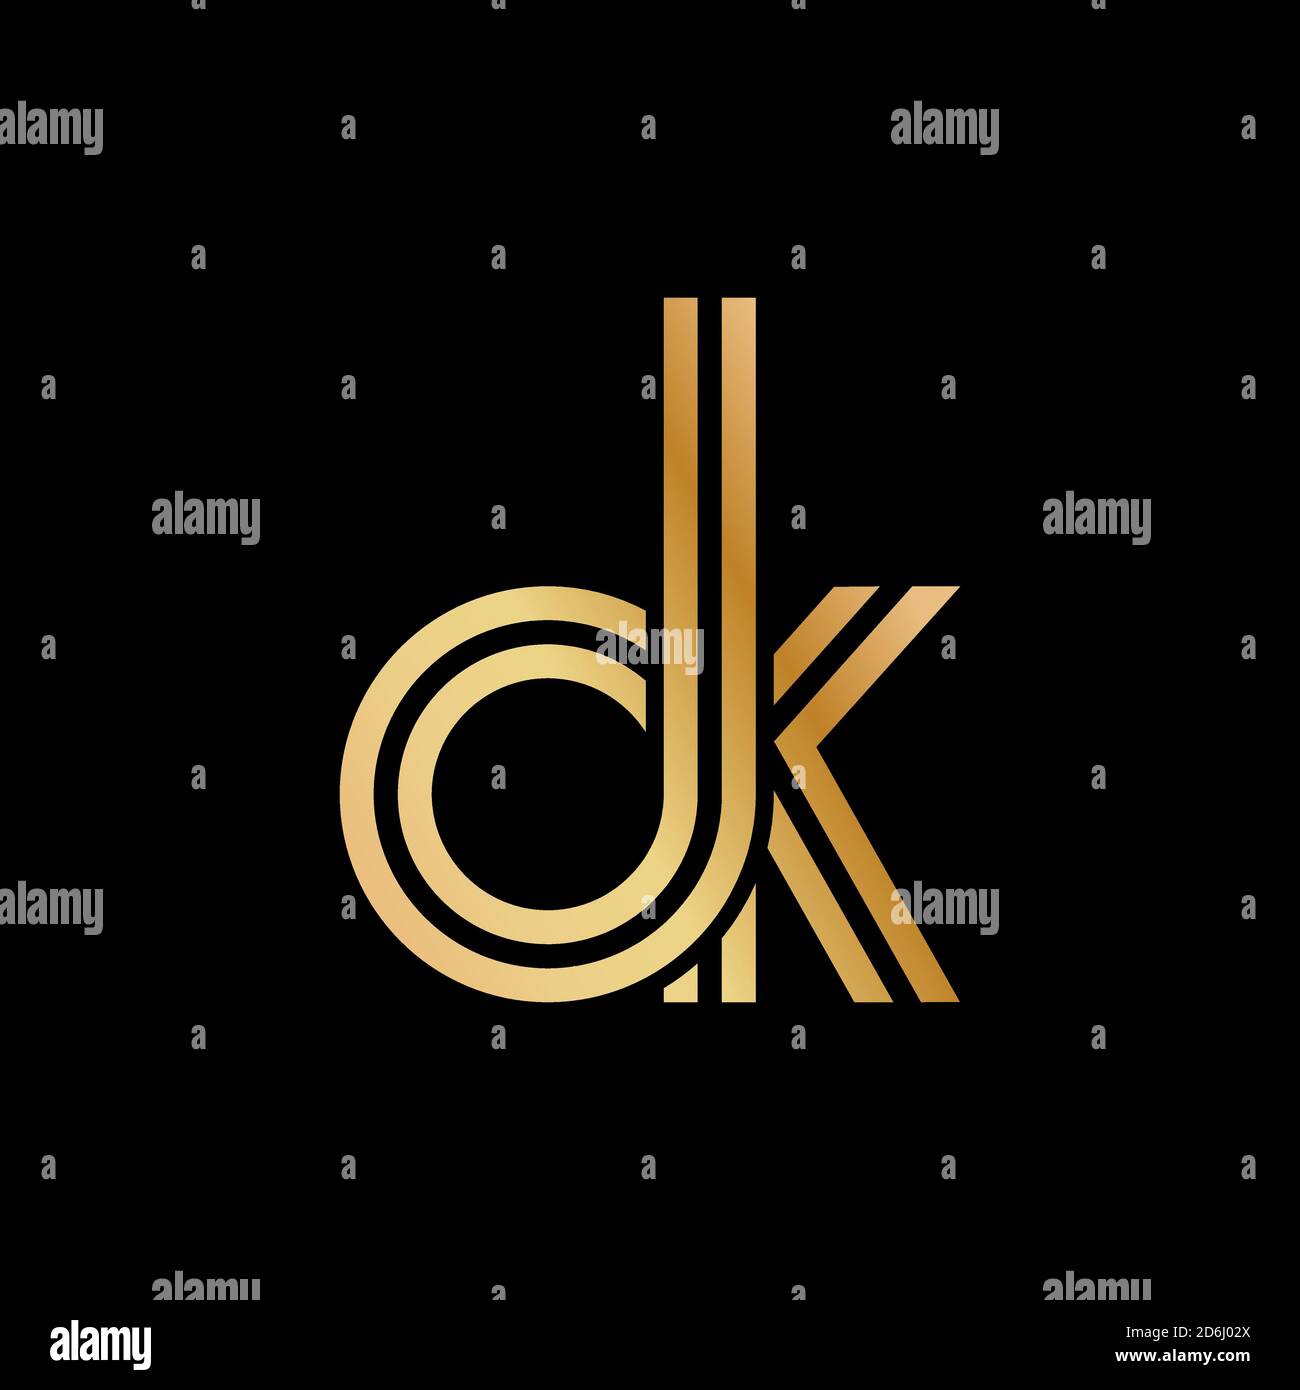 Lowercase letters o and k. Flat bound design in a Golden hue for a logo, brand, or logo. Vector illustration Stock Vector